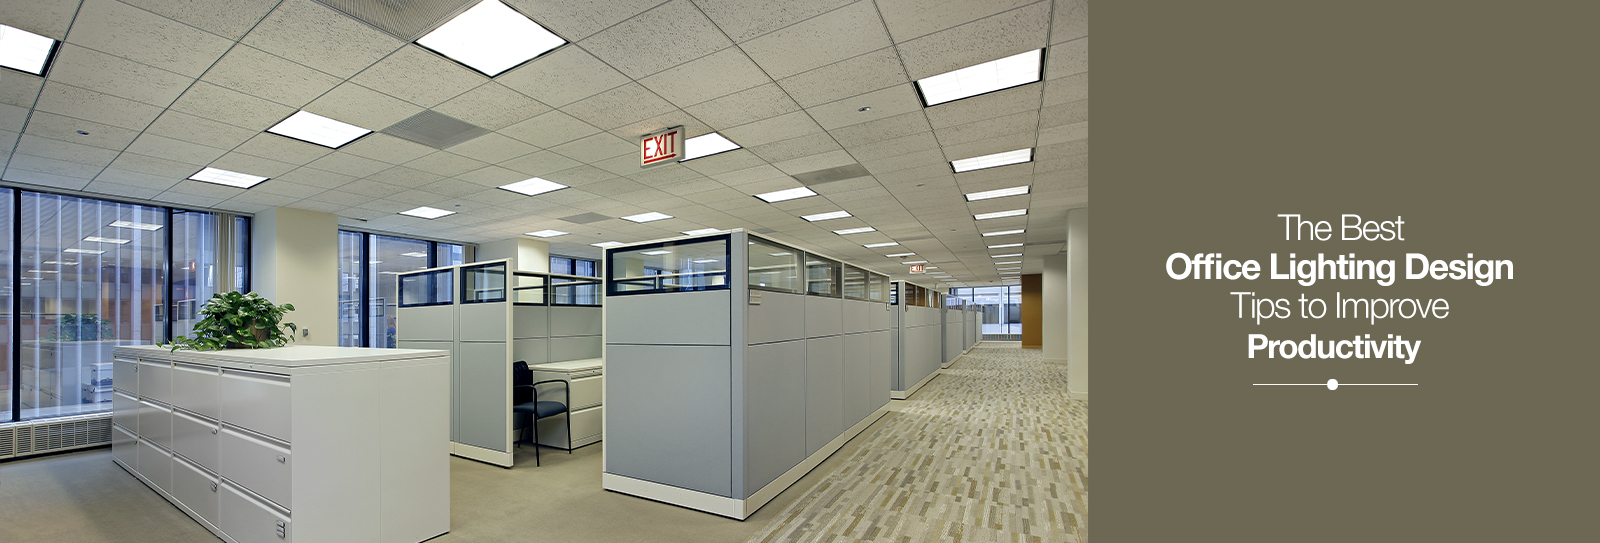 The Best Office Lighting Design Tips to Improve Productivity | Jaquar